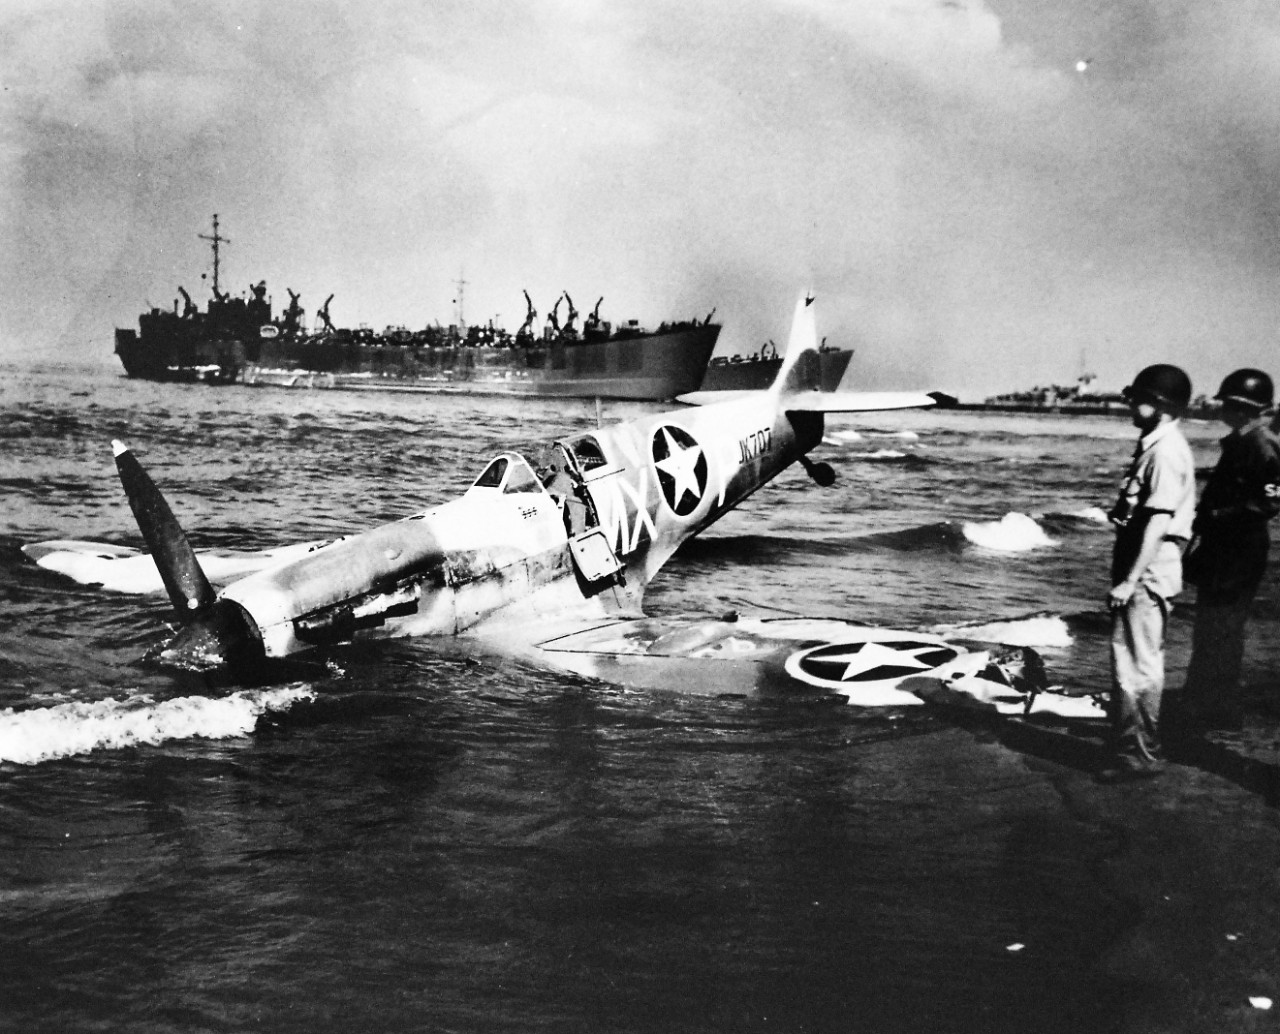 LC-Lot-916-2:   Operation Avalanche, September 1943.  Forced Landing On Invasion Beach.  Combat ended with a forced landing on the beach at Paestum, Italy, for this Spitfire being examined by U.S. Coast Guardsman and soldier.  Note, the three swastikas painted on the cockpit of the plane.  U.S. Coast Guardsmen manned combat transports and landing craft, one of which appears in the background.    Official Coast Guard Photograph. Photographed through Mylar sleeve.   Courtesy of the Library of Congress.  (2016/05/19).